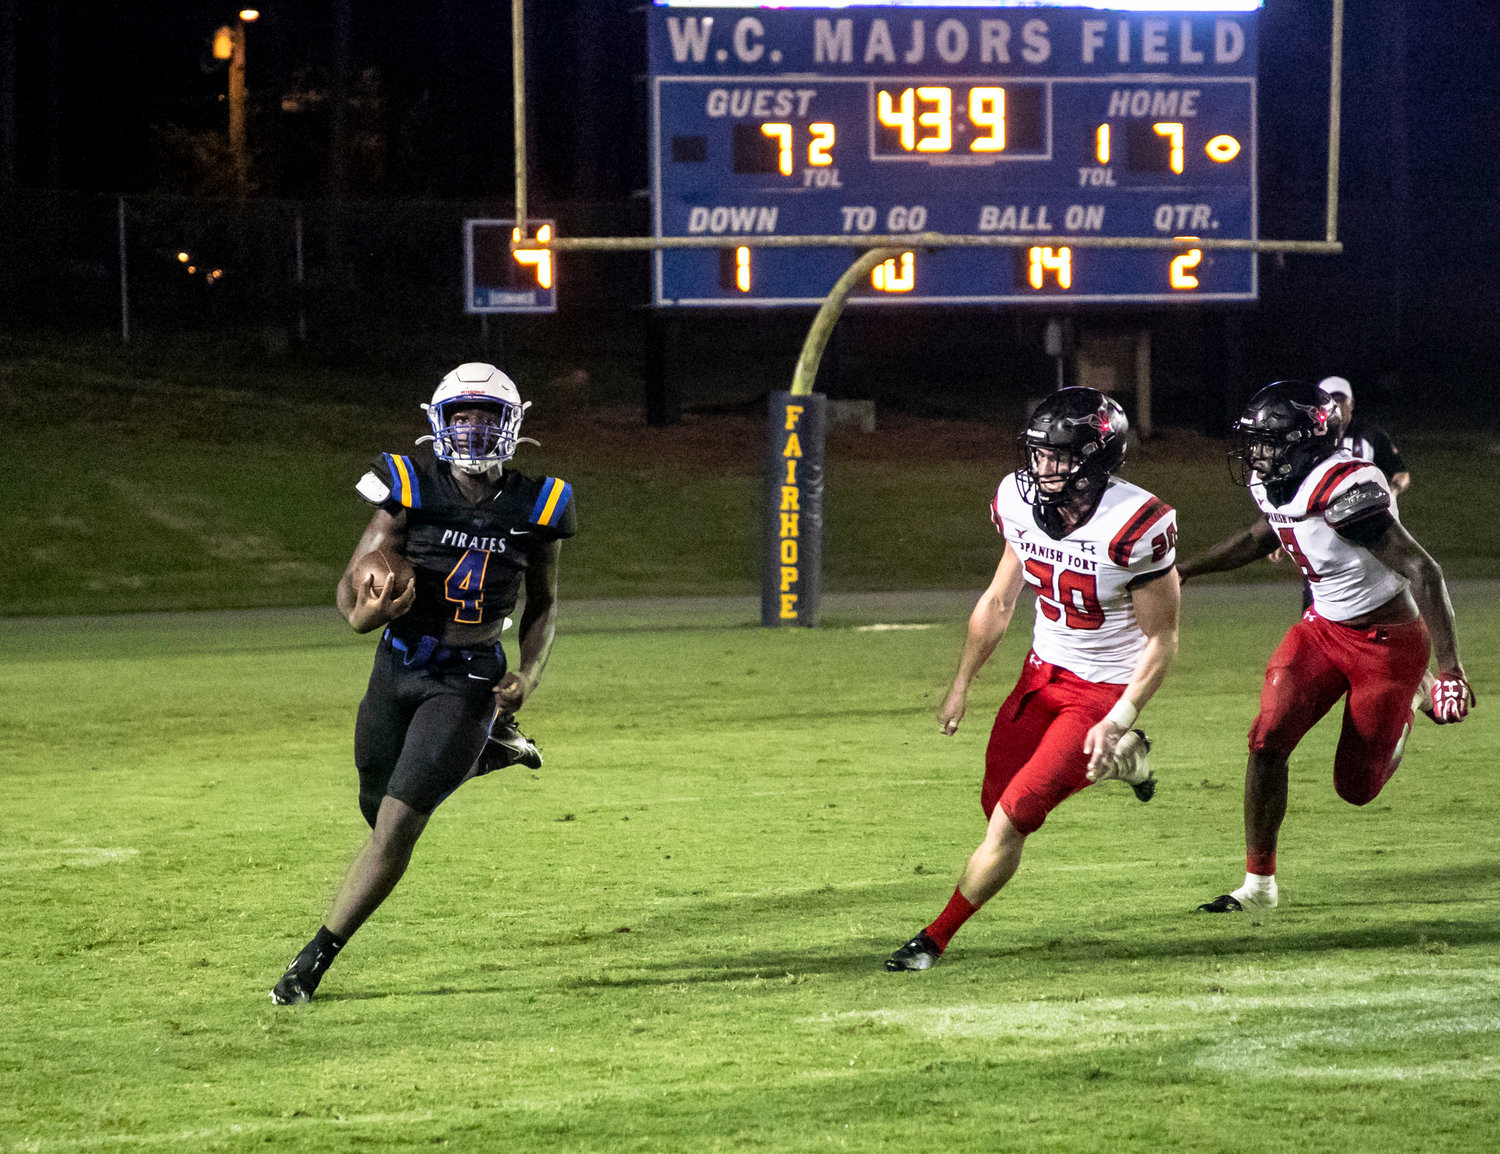 Fairhope running back Qualin McCants looks for the corner on a run during the Pirates’ season-opening game against Spanish Fort Aug. 19 at home. McCants supplied three rushing scores to help Fairhope be one of three local teams to remain undefeated through Week 4 of the season.